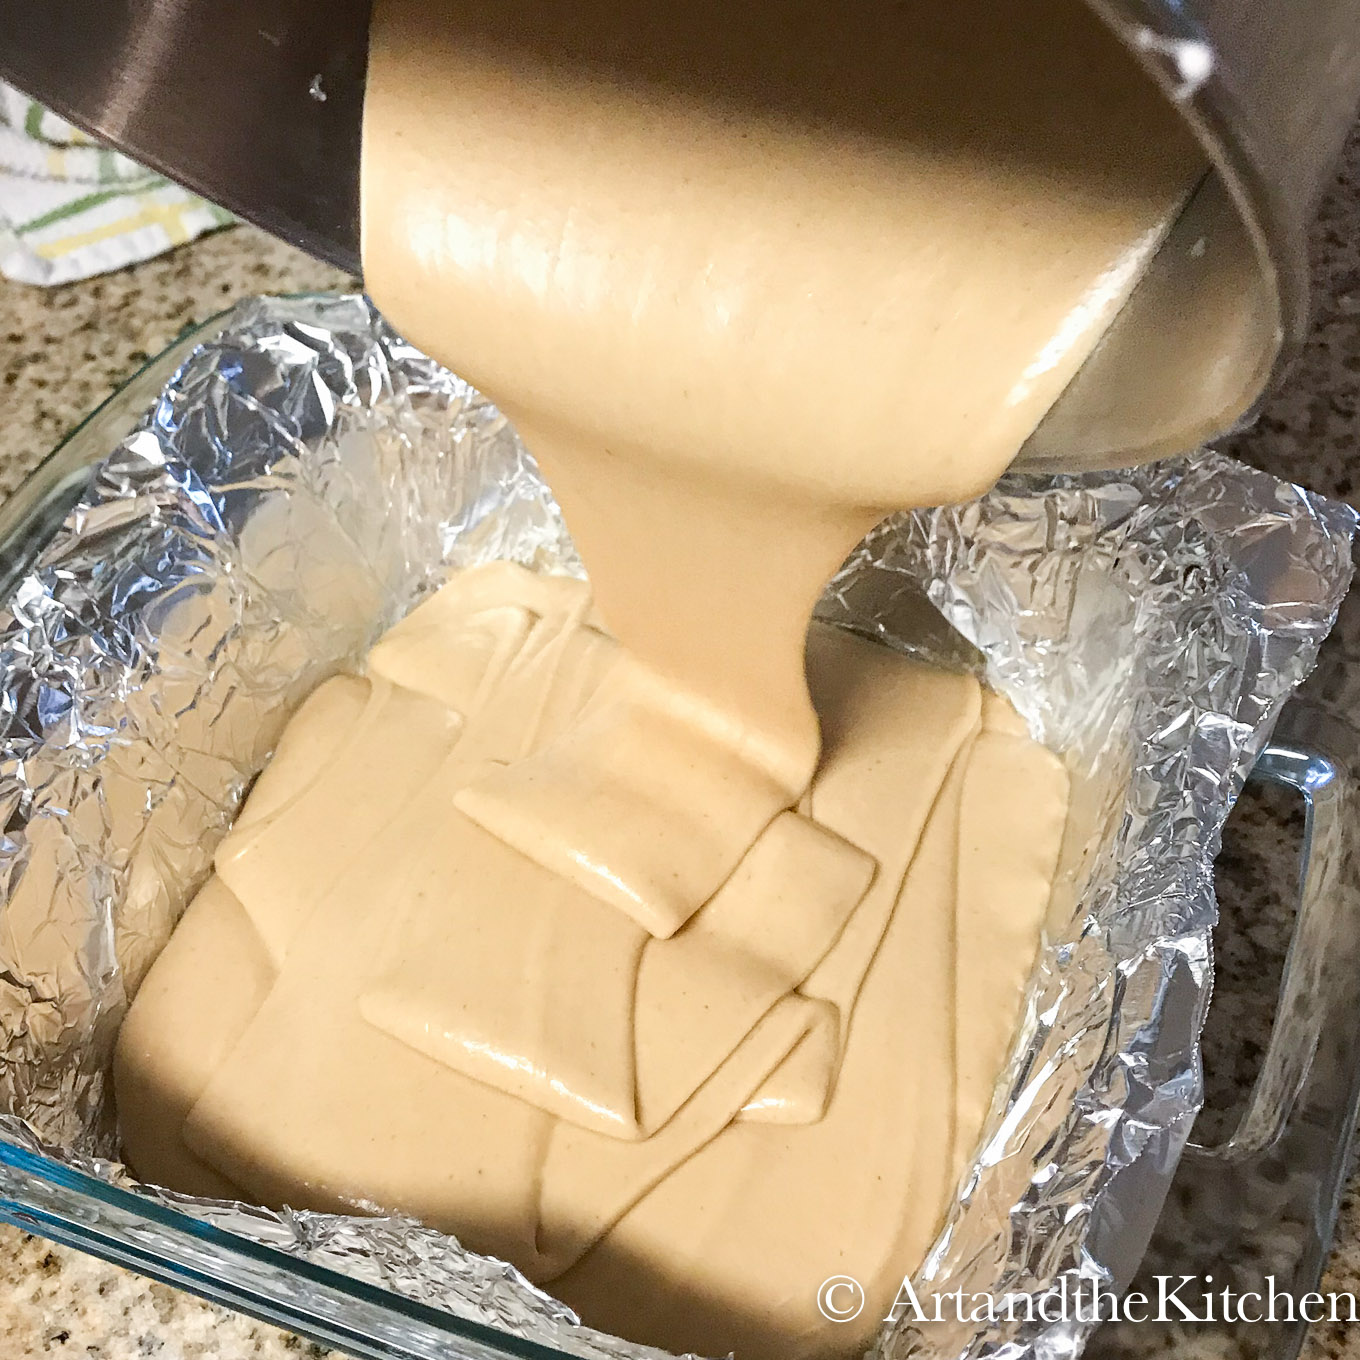 Pouring smooth peanut butter fudge into foil lined baking pan.